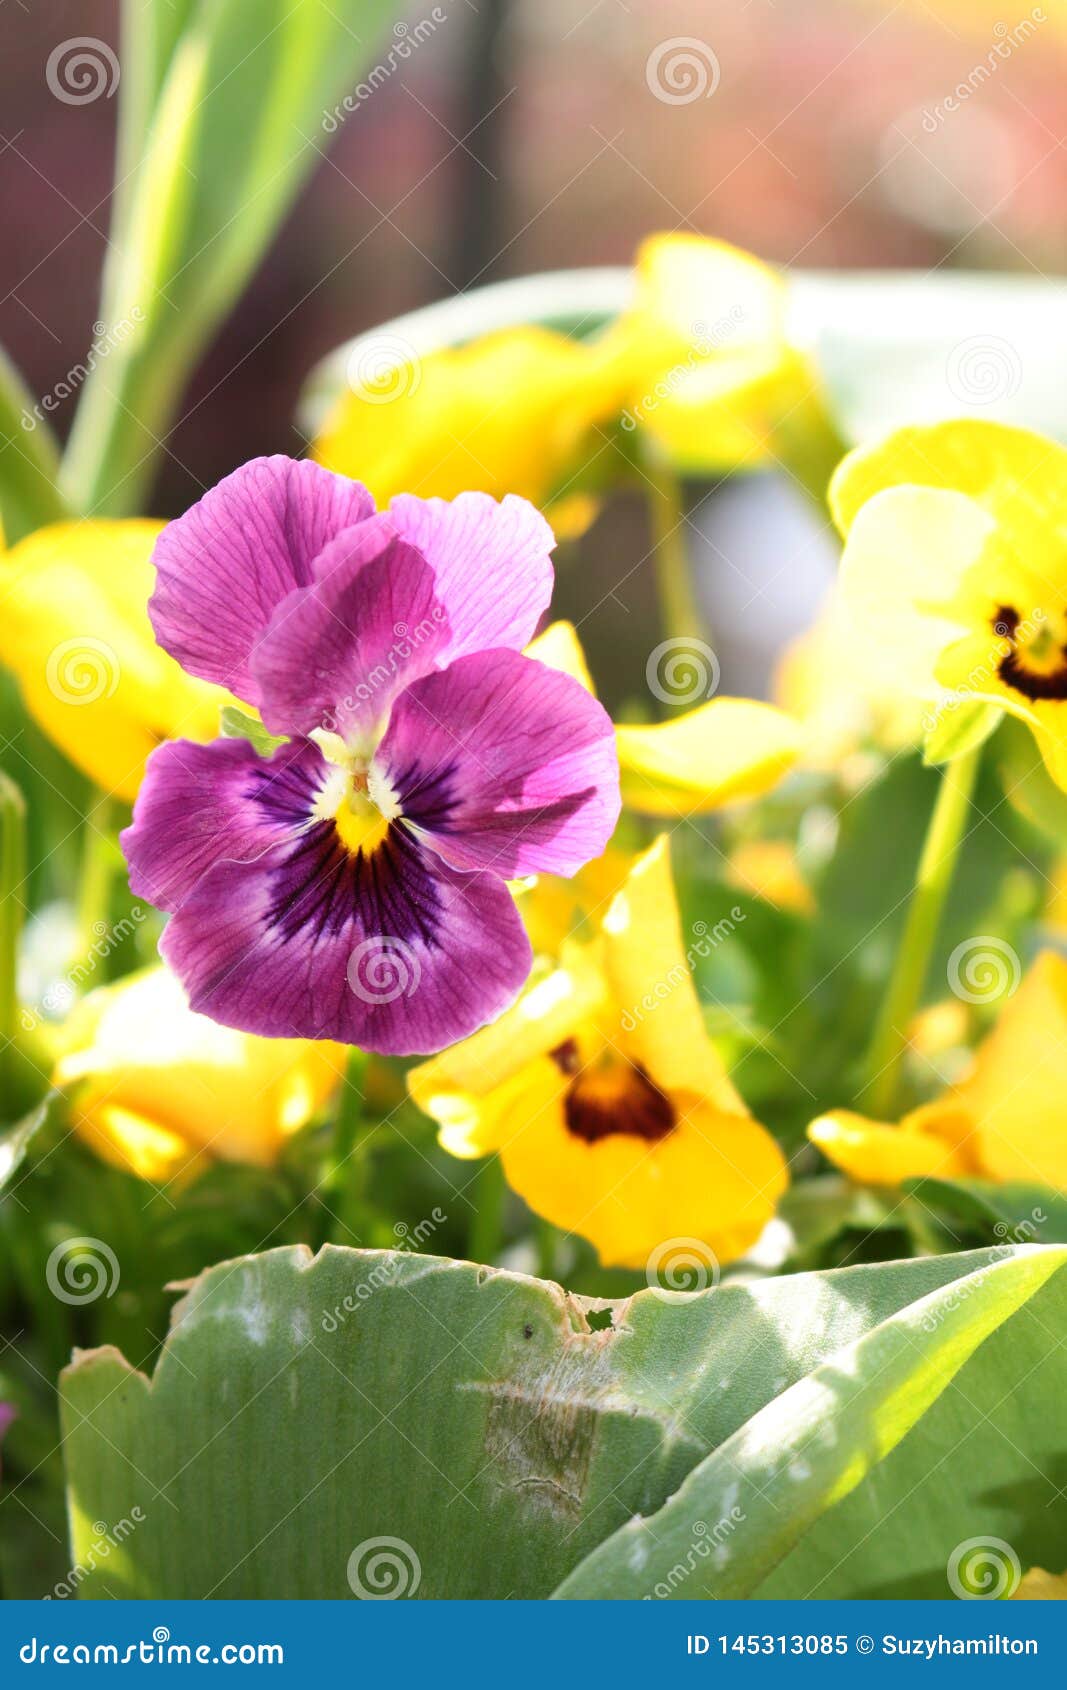 Violas Purple and Yellow Close Up in a Garden Border Stock Image ...